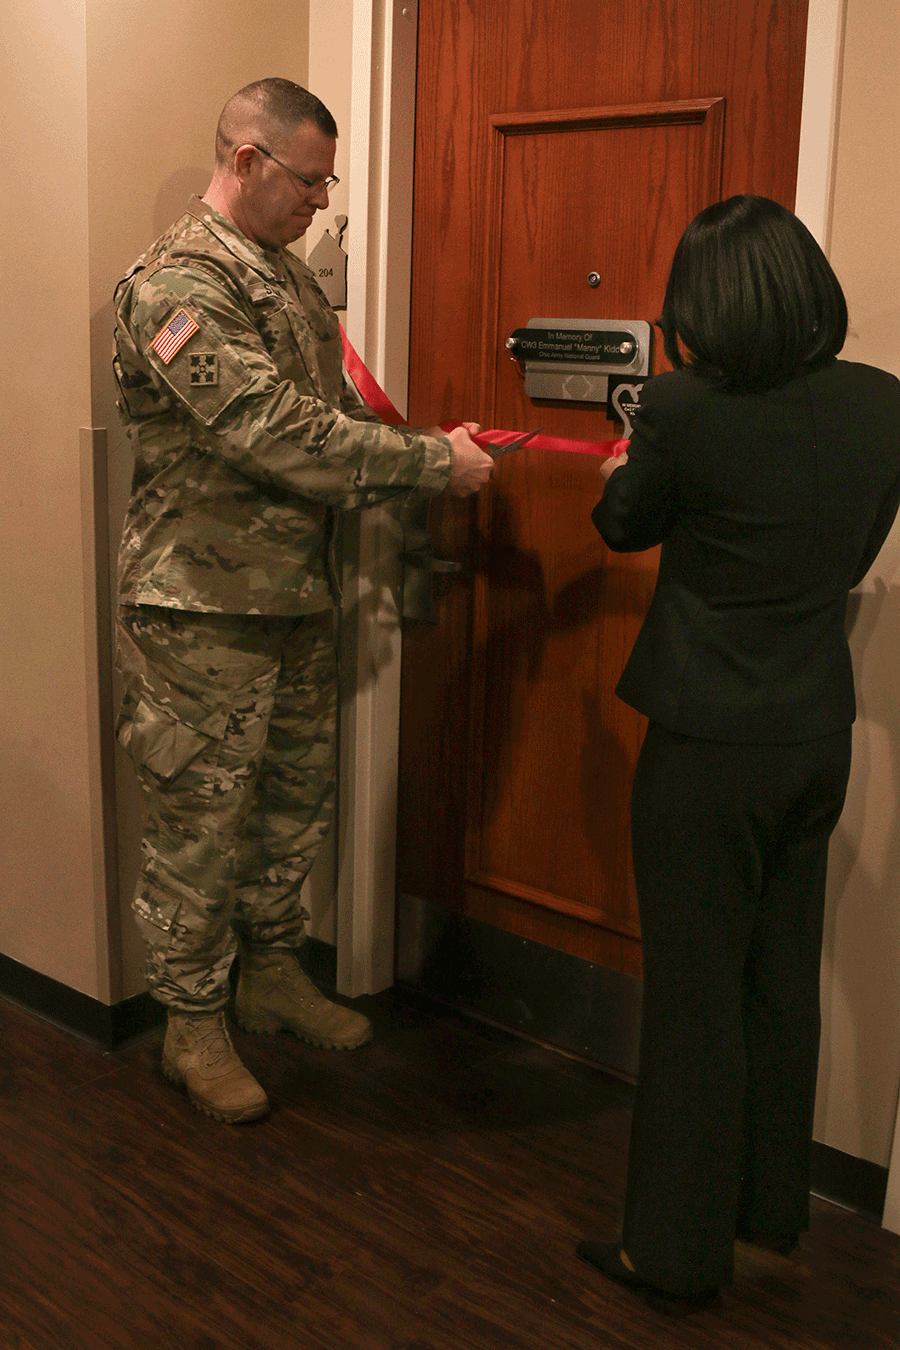 Priscilla Kidd and Col. Daniel Shank cut a red ribbon in front of door to room 204.